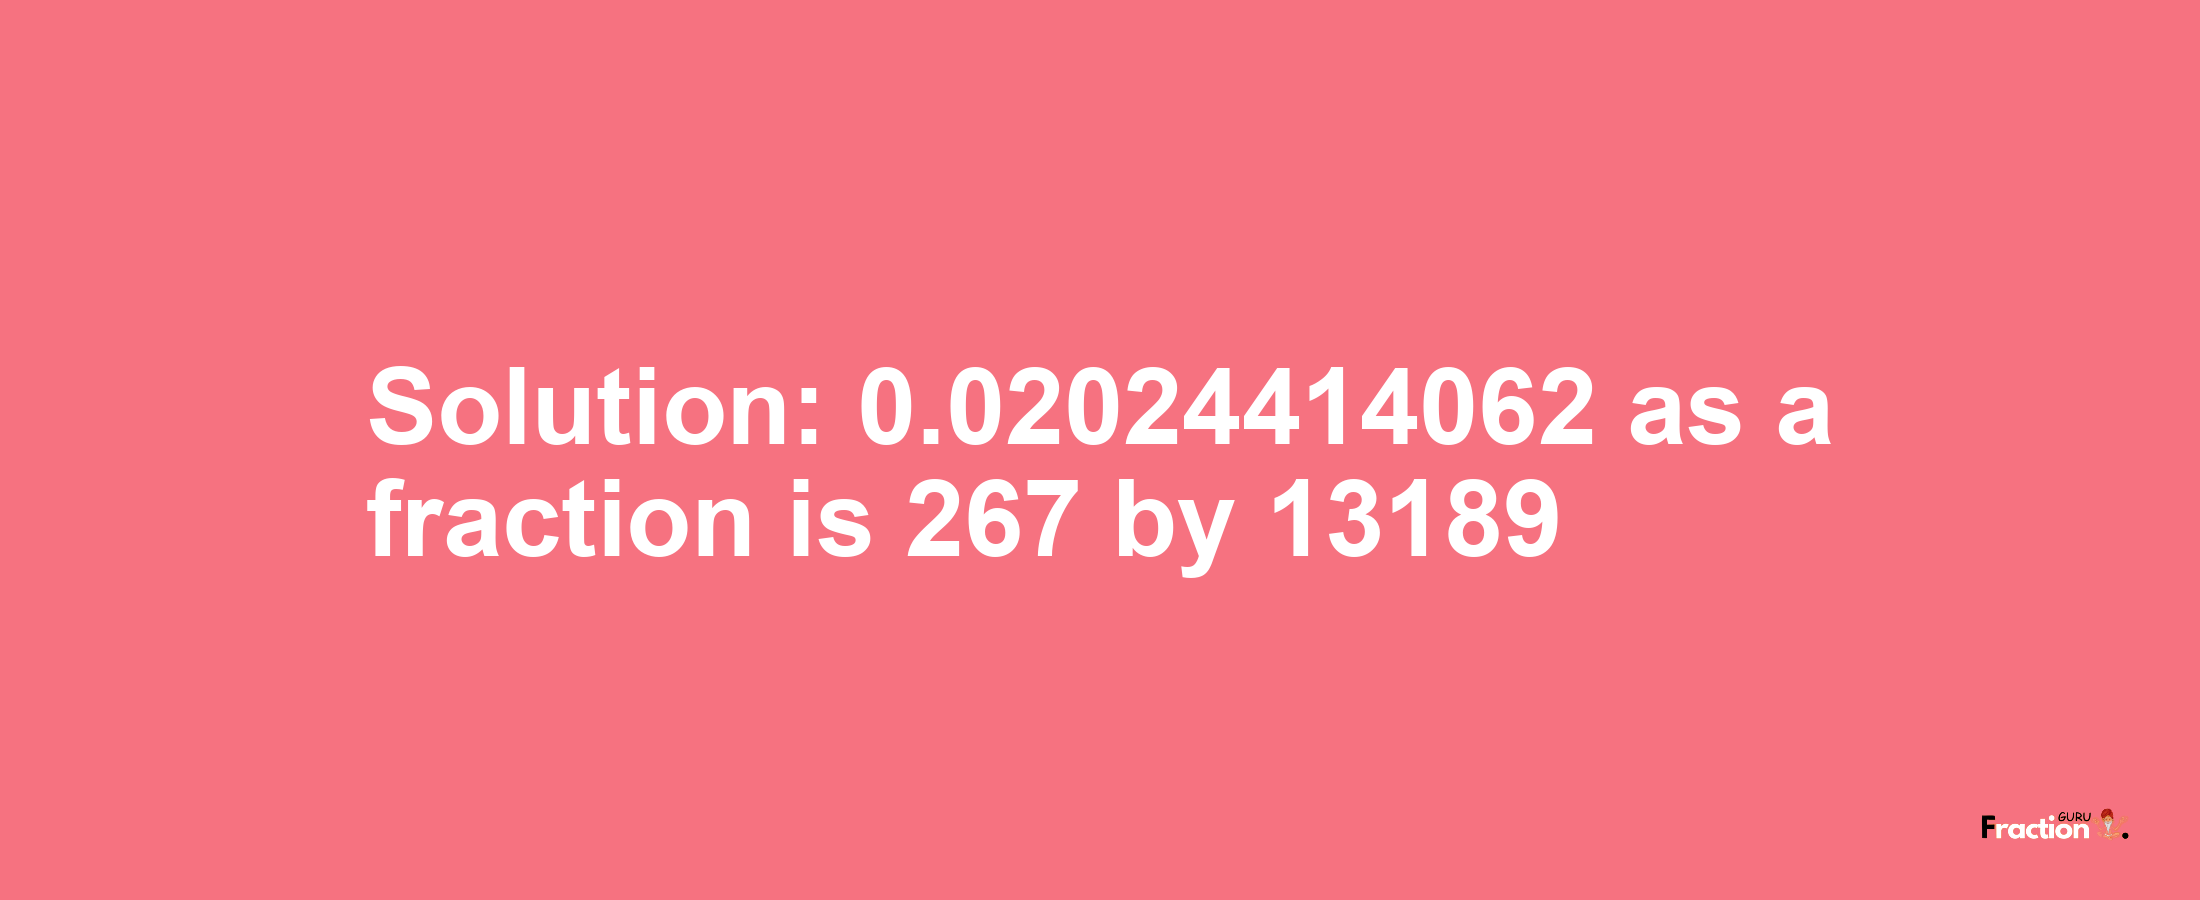 Solution:0.02024414062 as a fraction is 267/13189